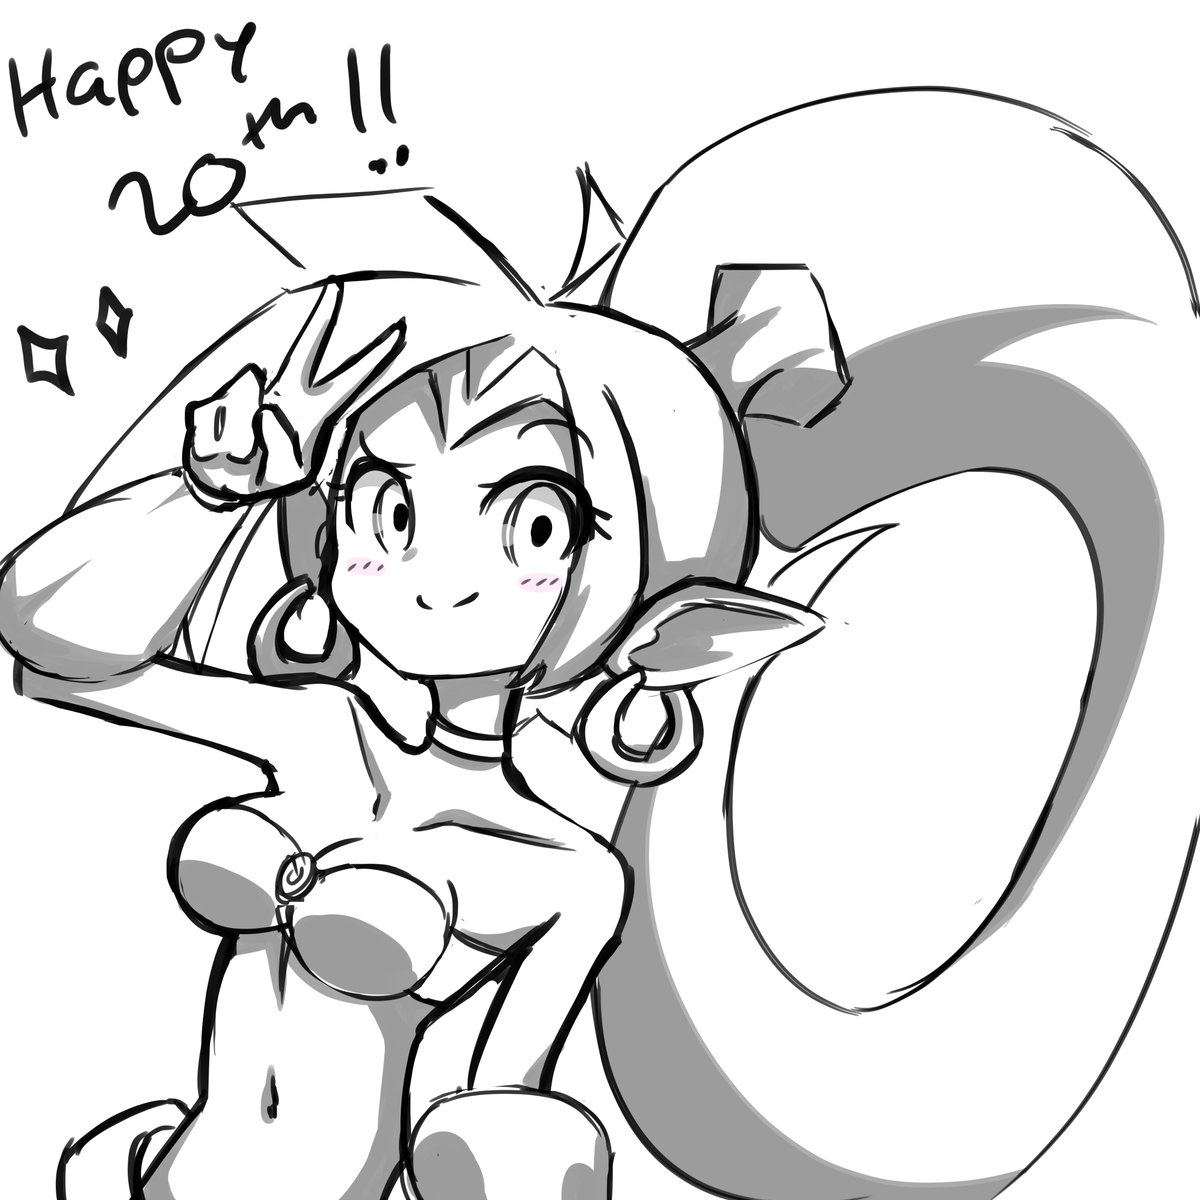 Wasn't planning on drawing today. But, I had to get something out! 😤
#Happy20thShantae @WayForward